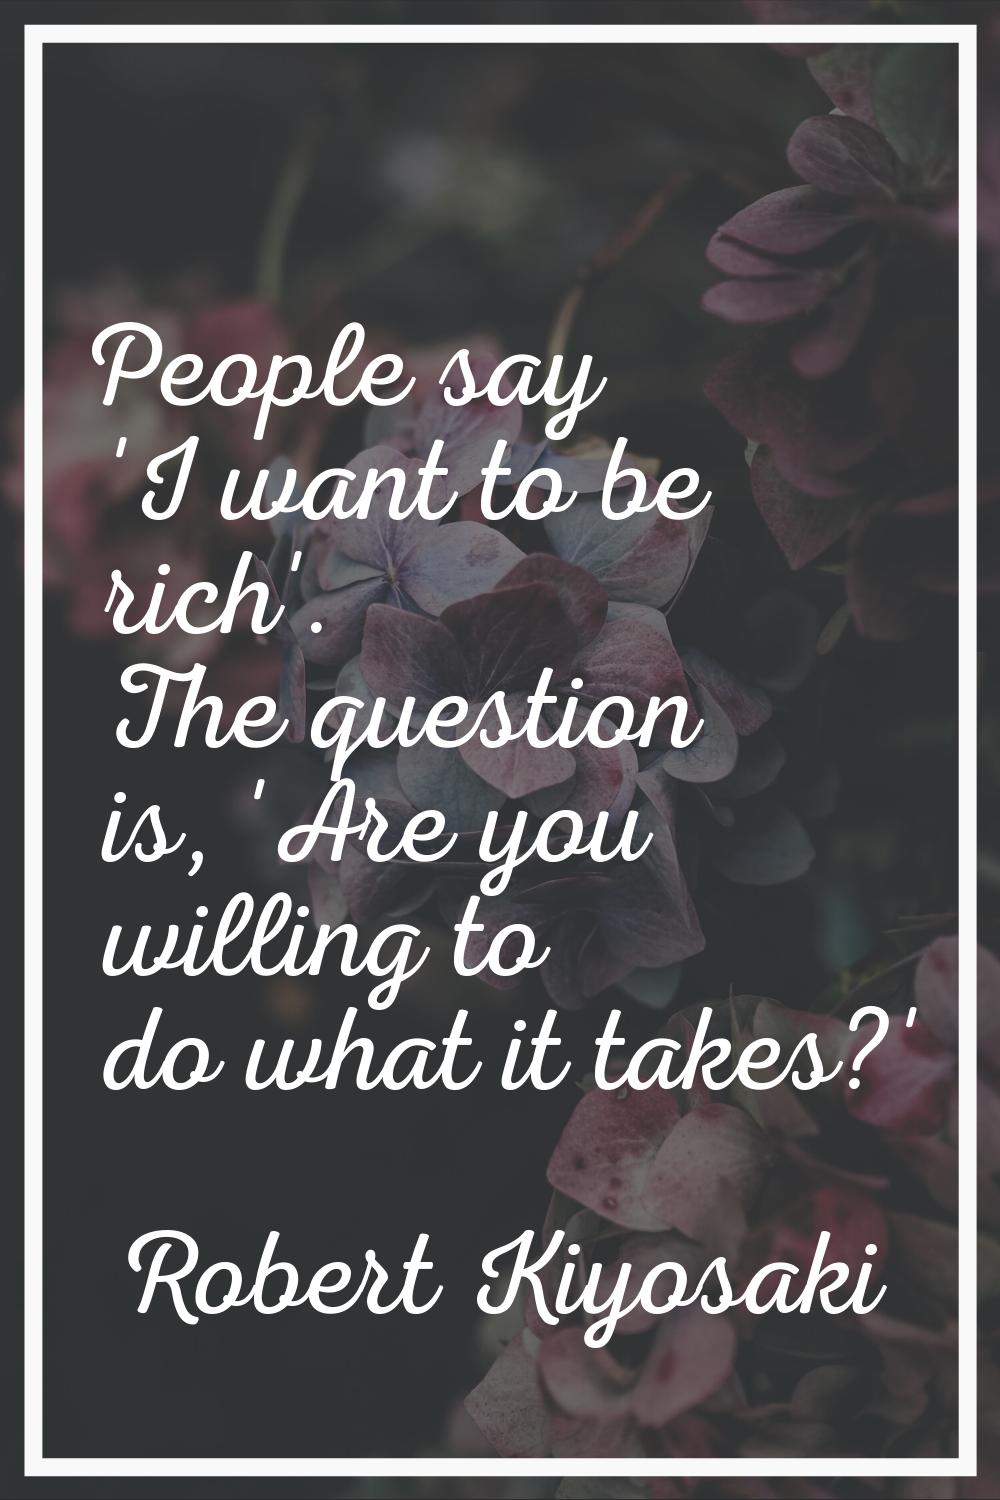 People say 'I want to be rich'. The question is, 'Are you willing to do what it takes?'